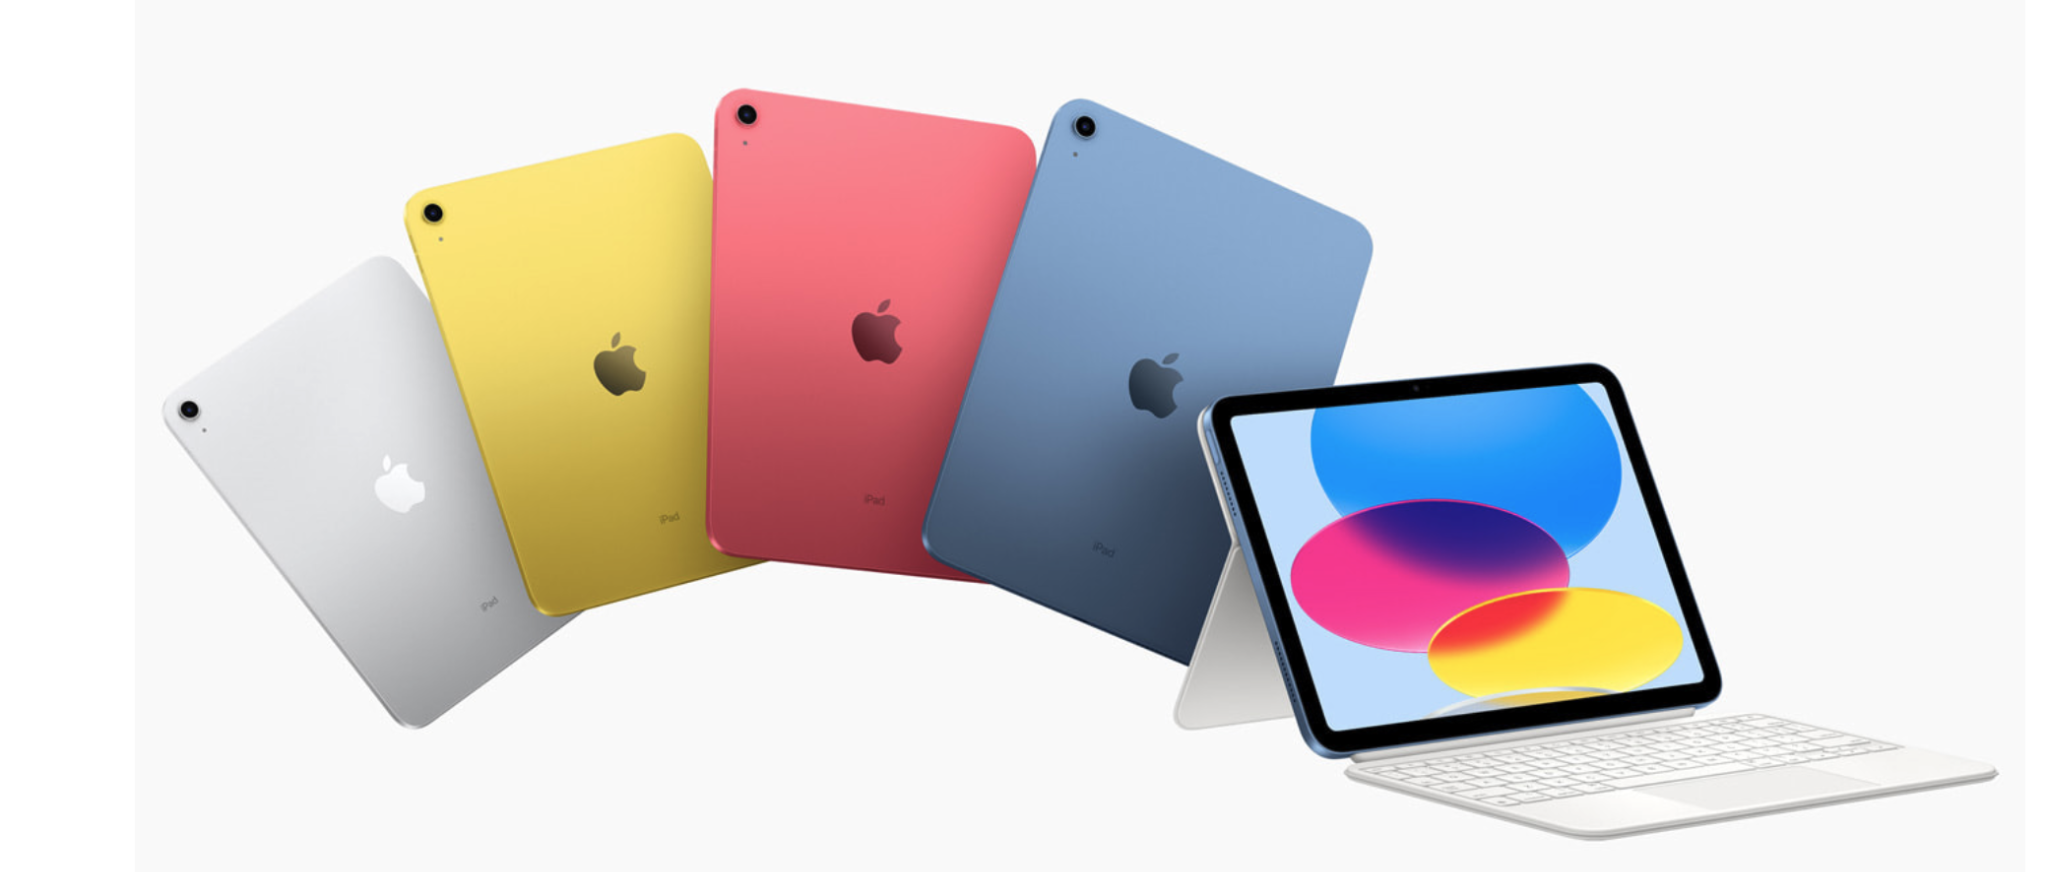 Say Hello to the Colorful New iPad